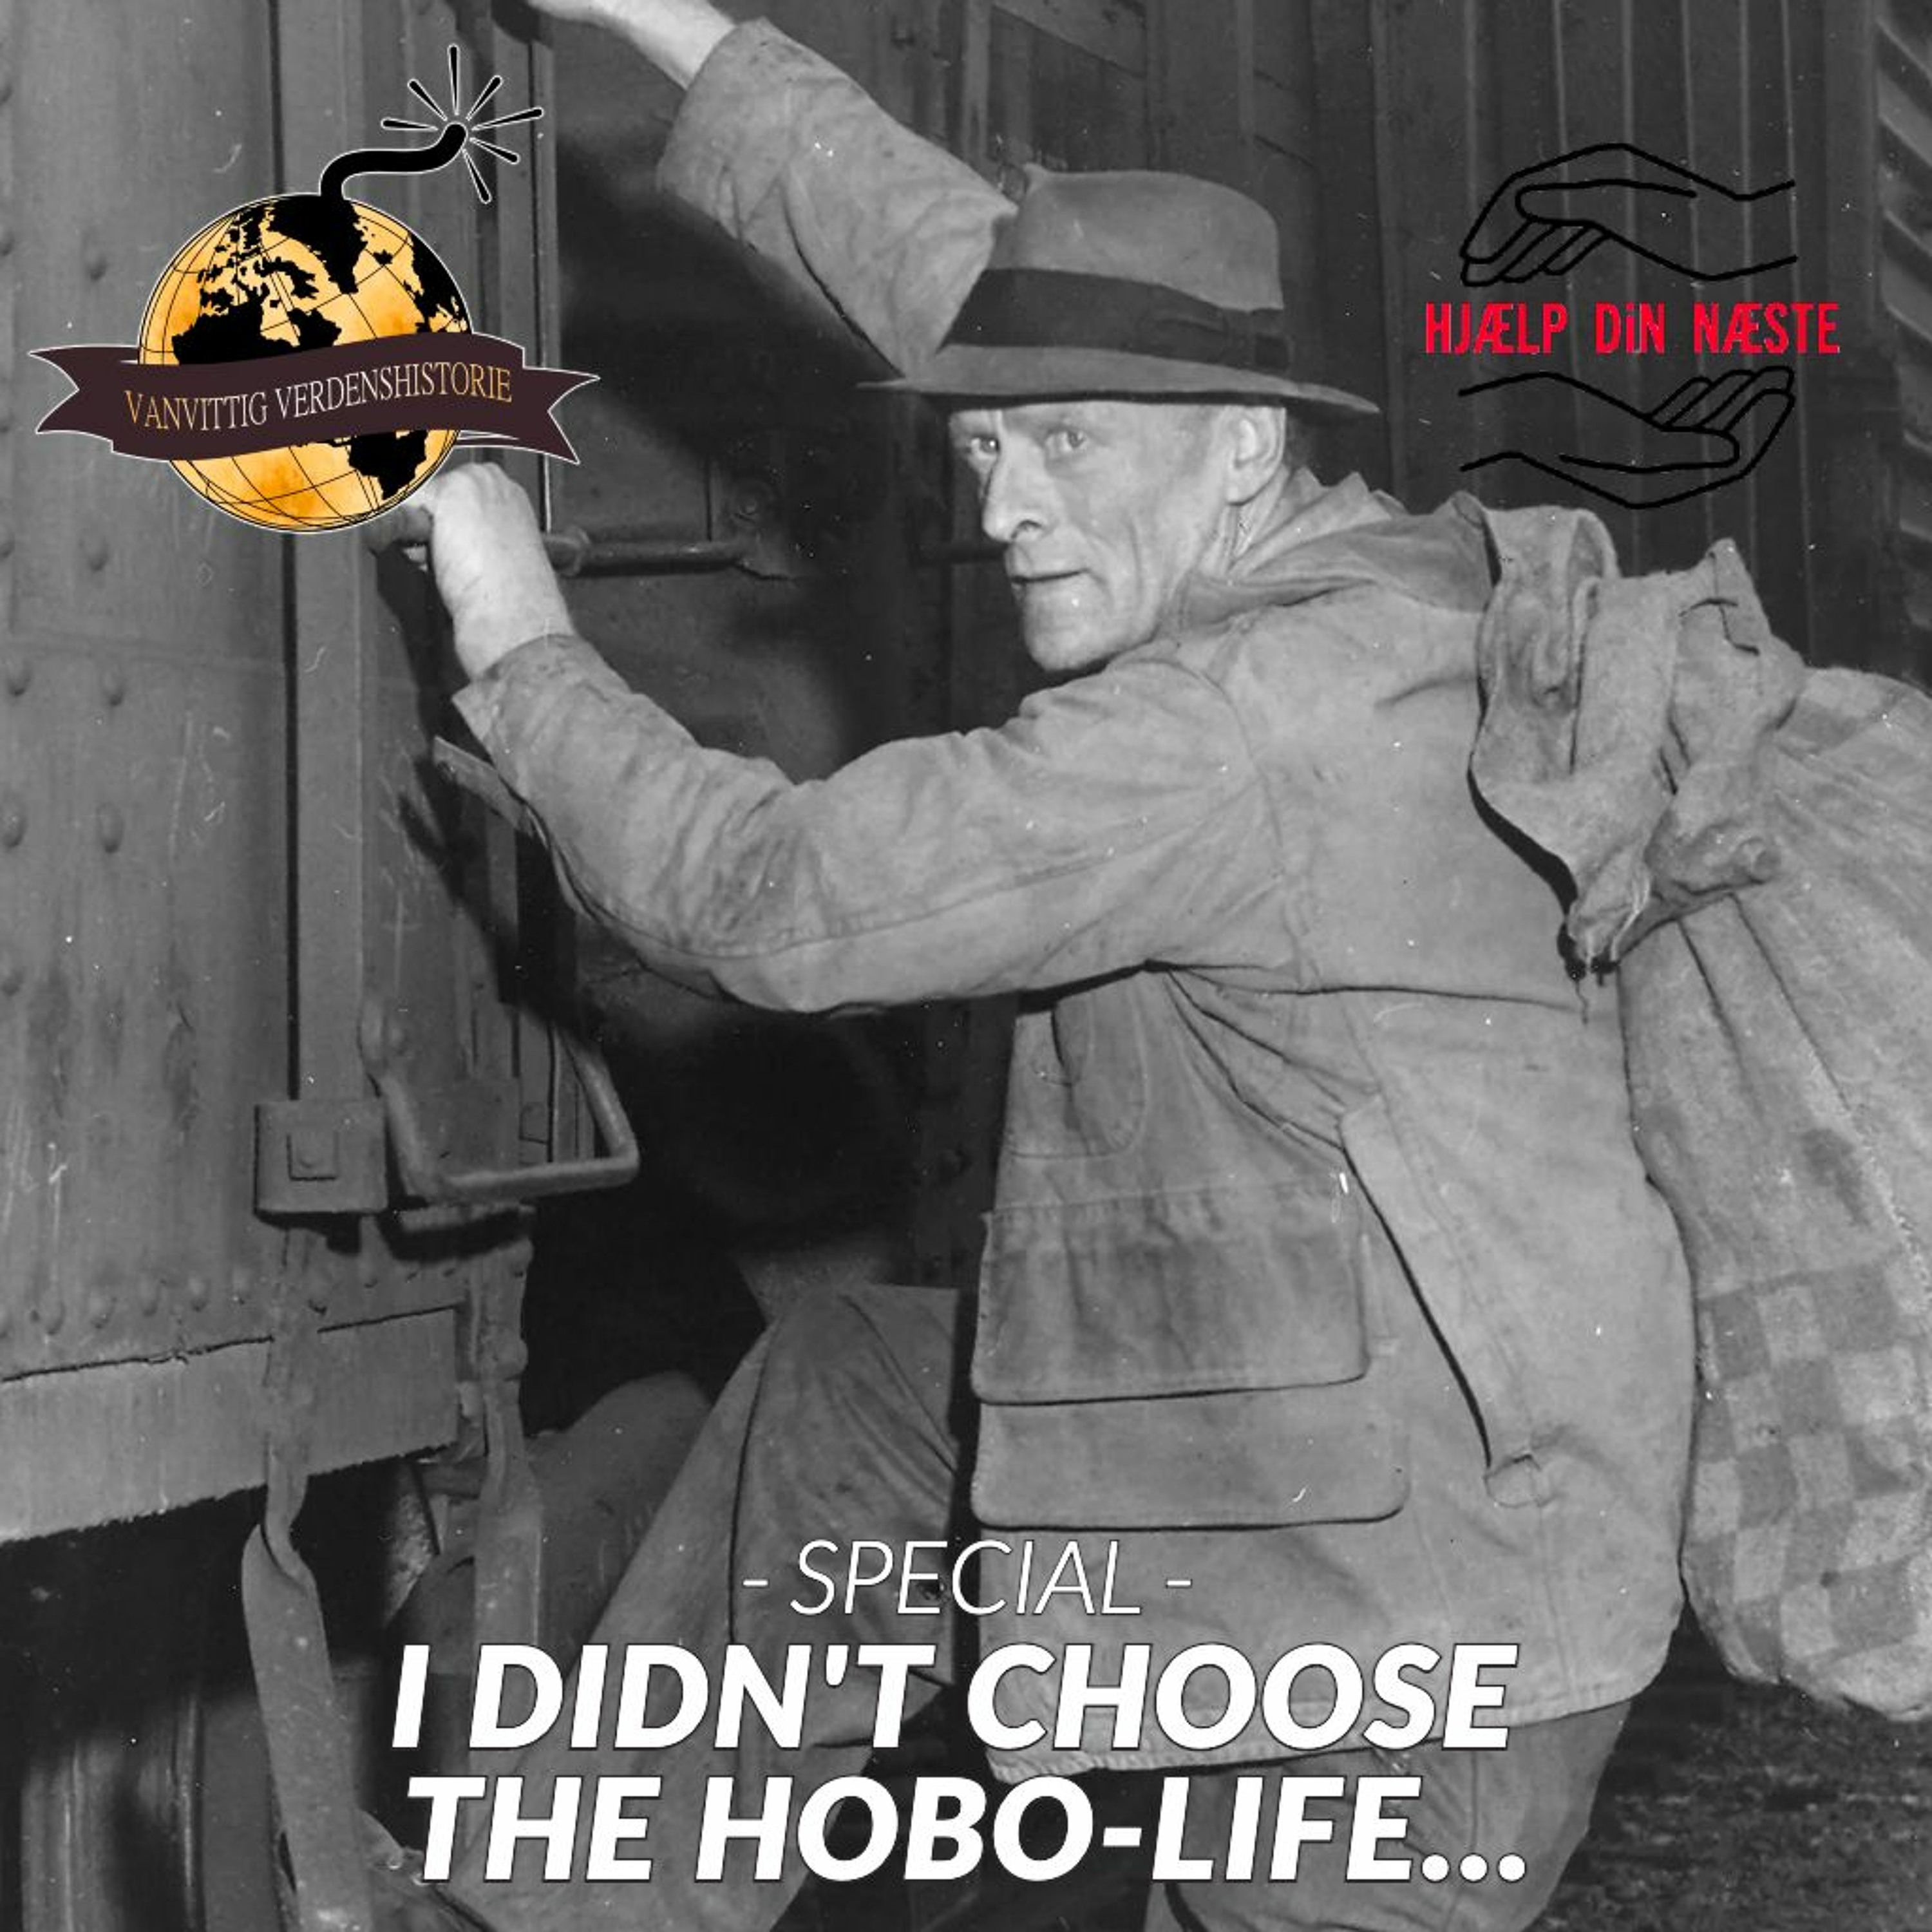 SPECIAL: I didn't choose the hobo-life...